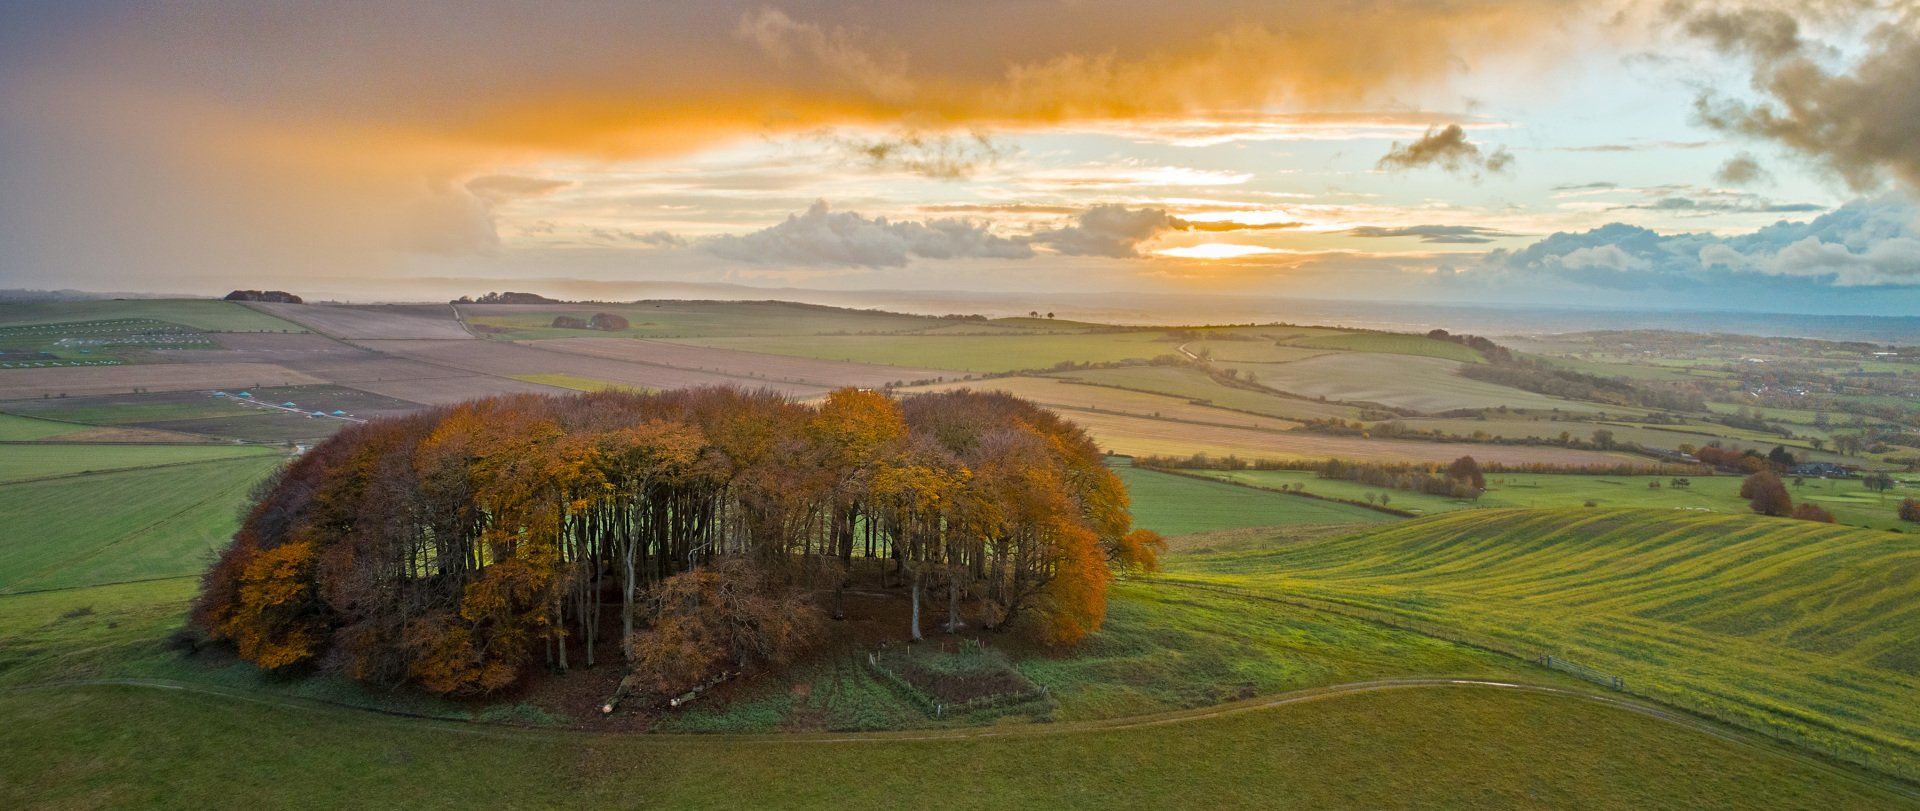 Drone sunset photography of a Wiltshire landscape.